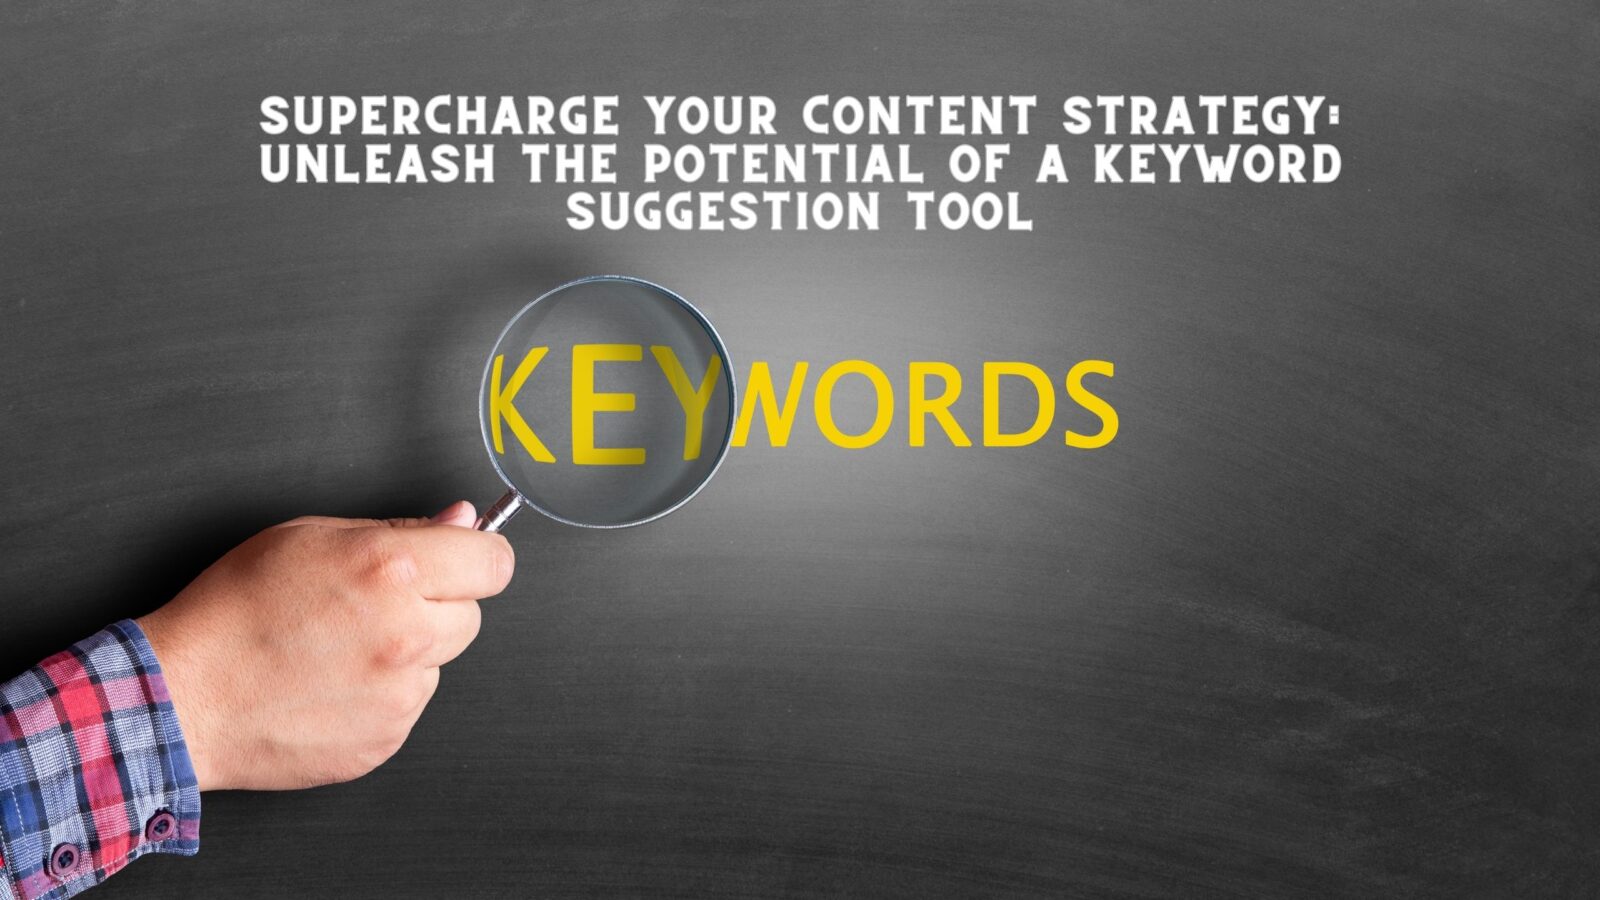 Supercharge Your Content Strategy: Unleash the Potential of a Keyword Suggestion Tool